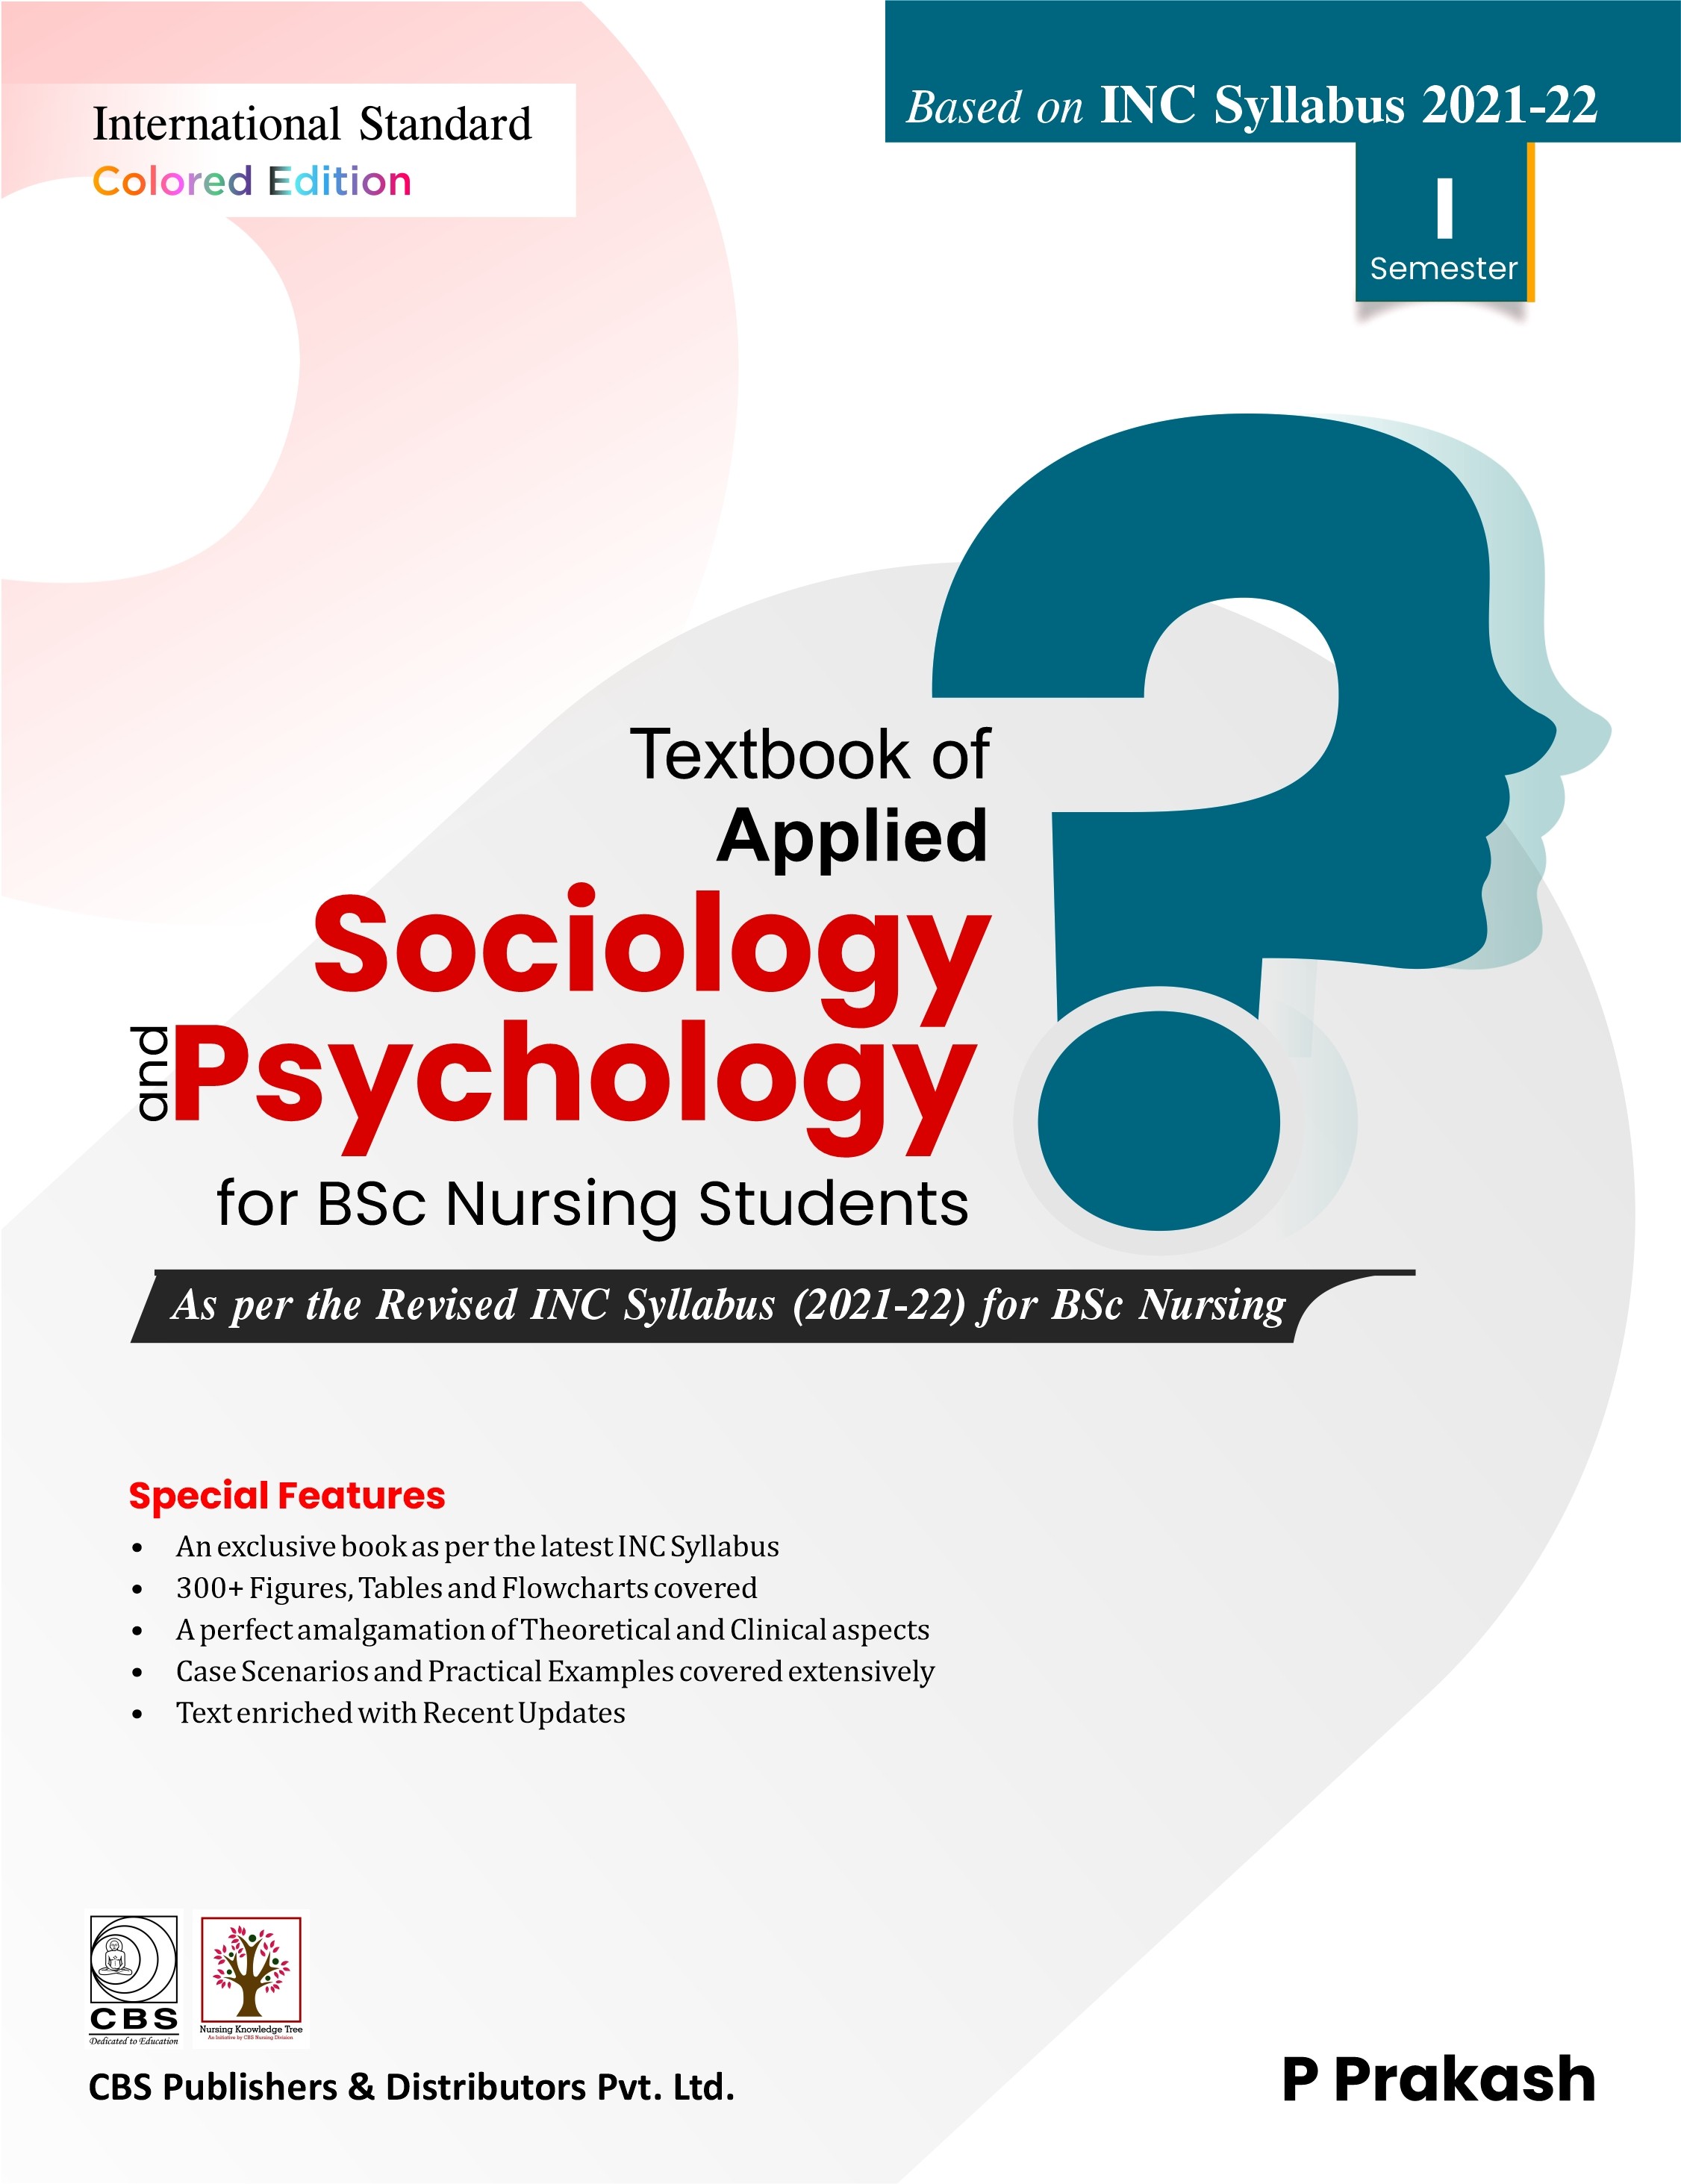 Textbook of Applied Sociology and Psychology for BSc Nursing (Based on INC Syllabus 2021-22)